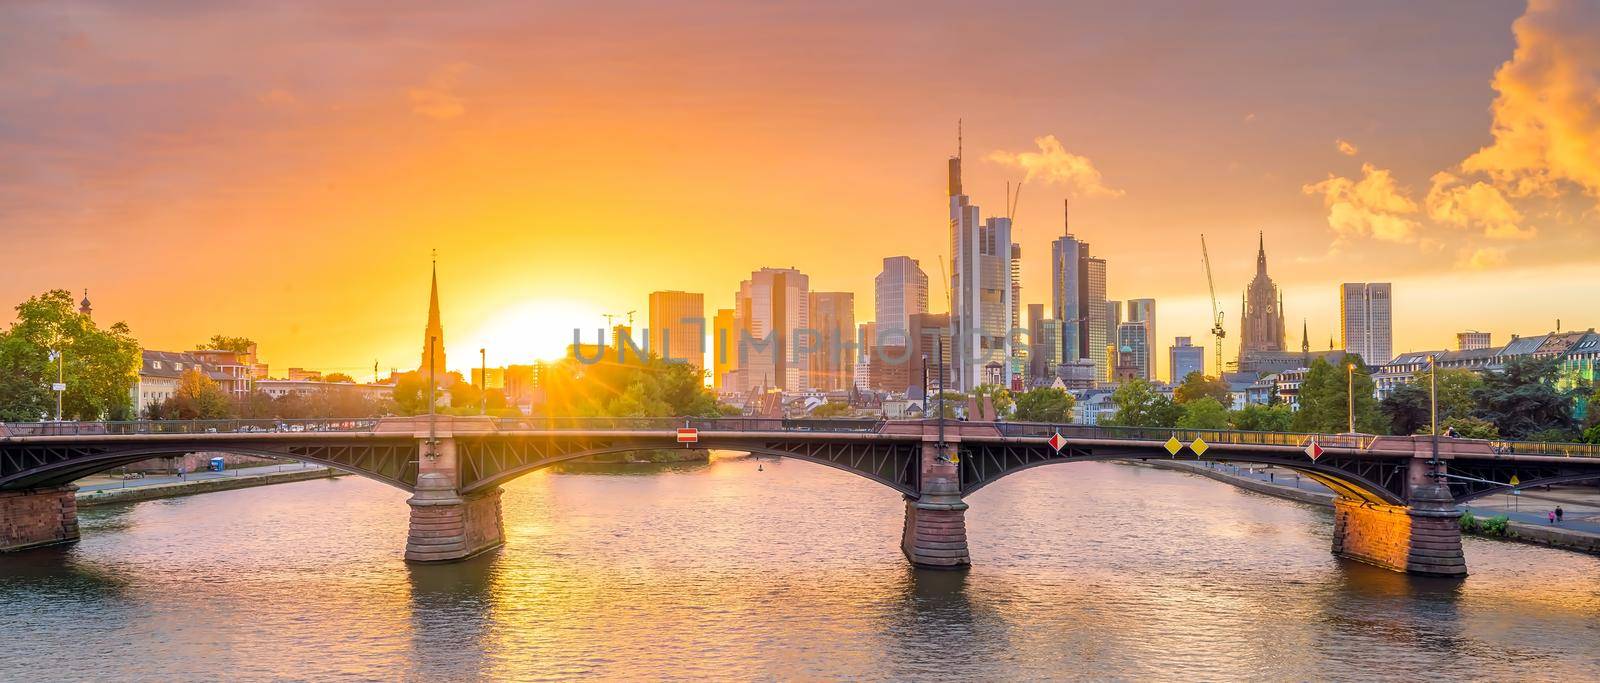 View of Frankfurt city skyline in Germany with sunset light